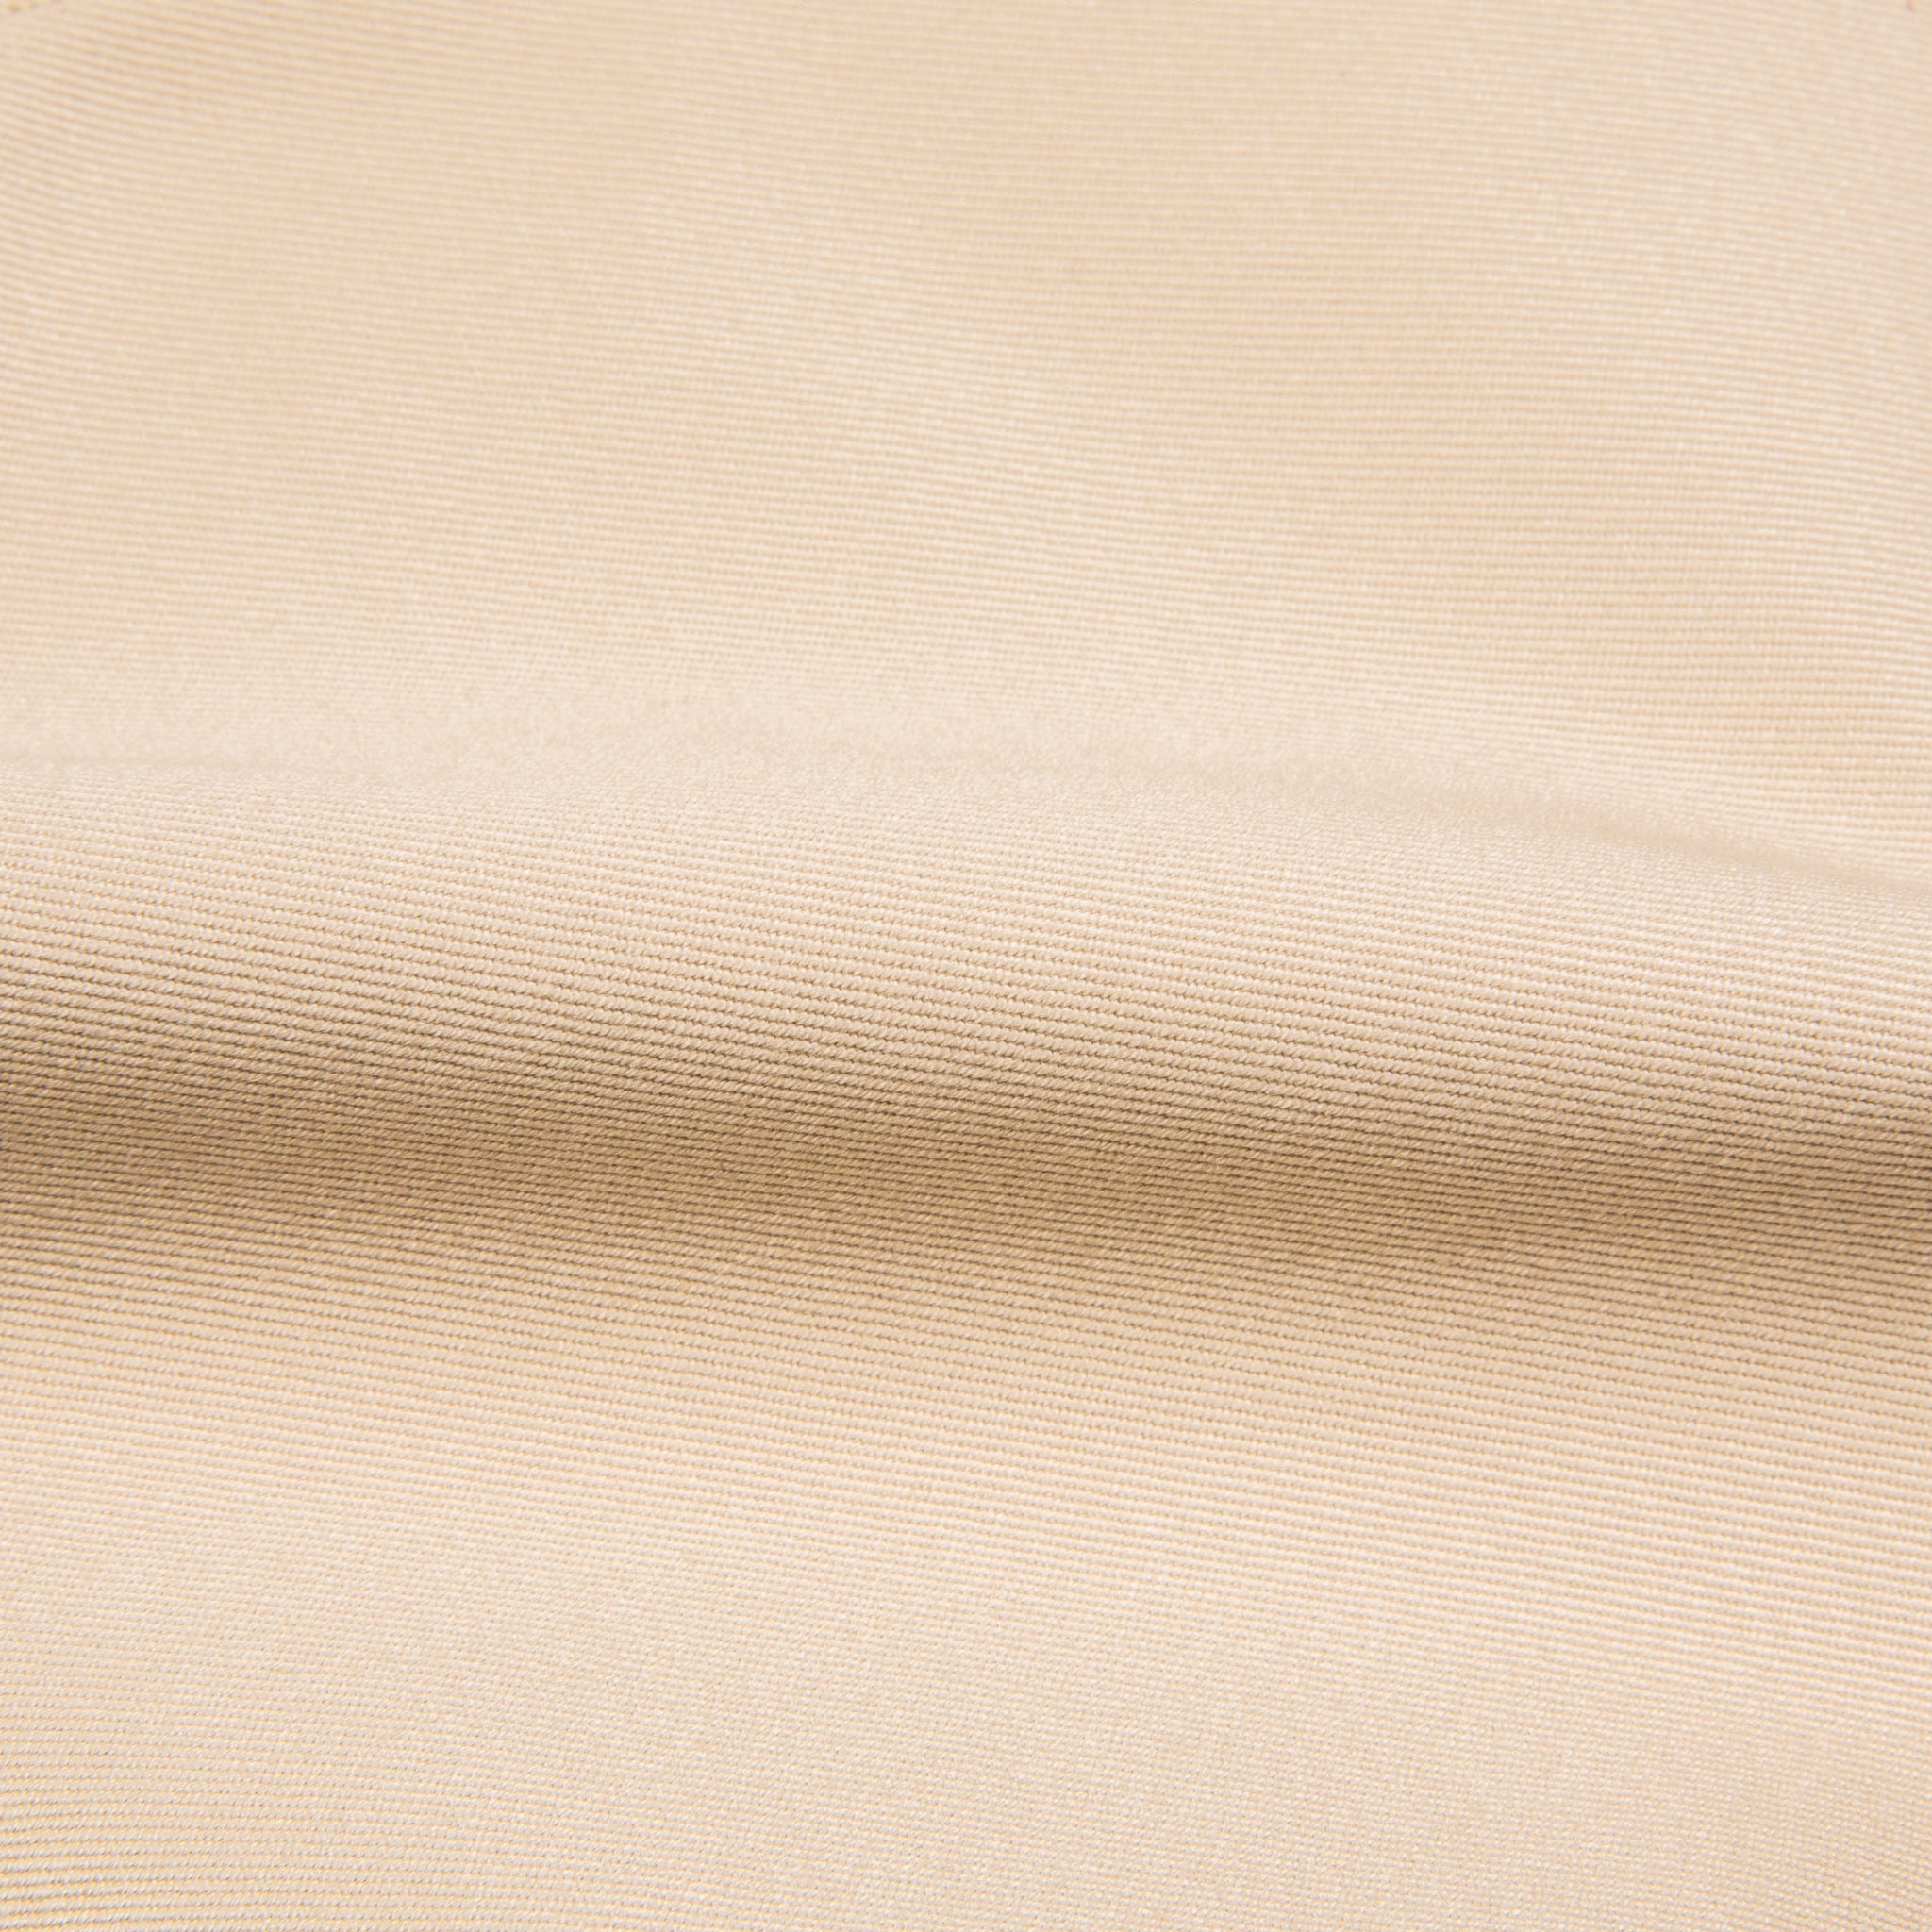 The Real McCoy&#39;s Blue Seal Chino Beige